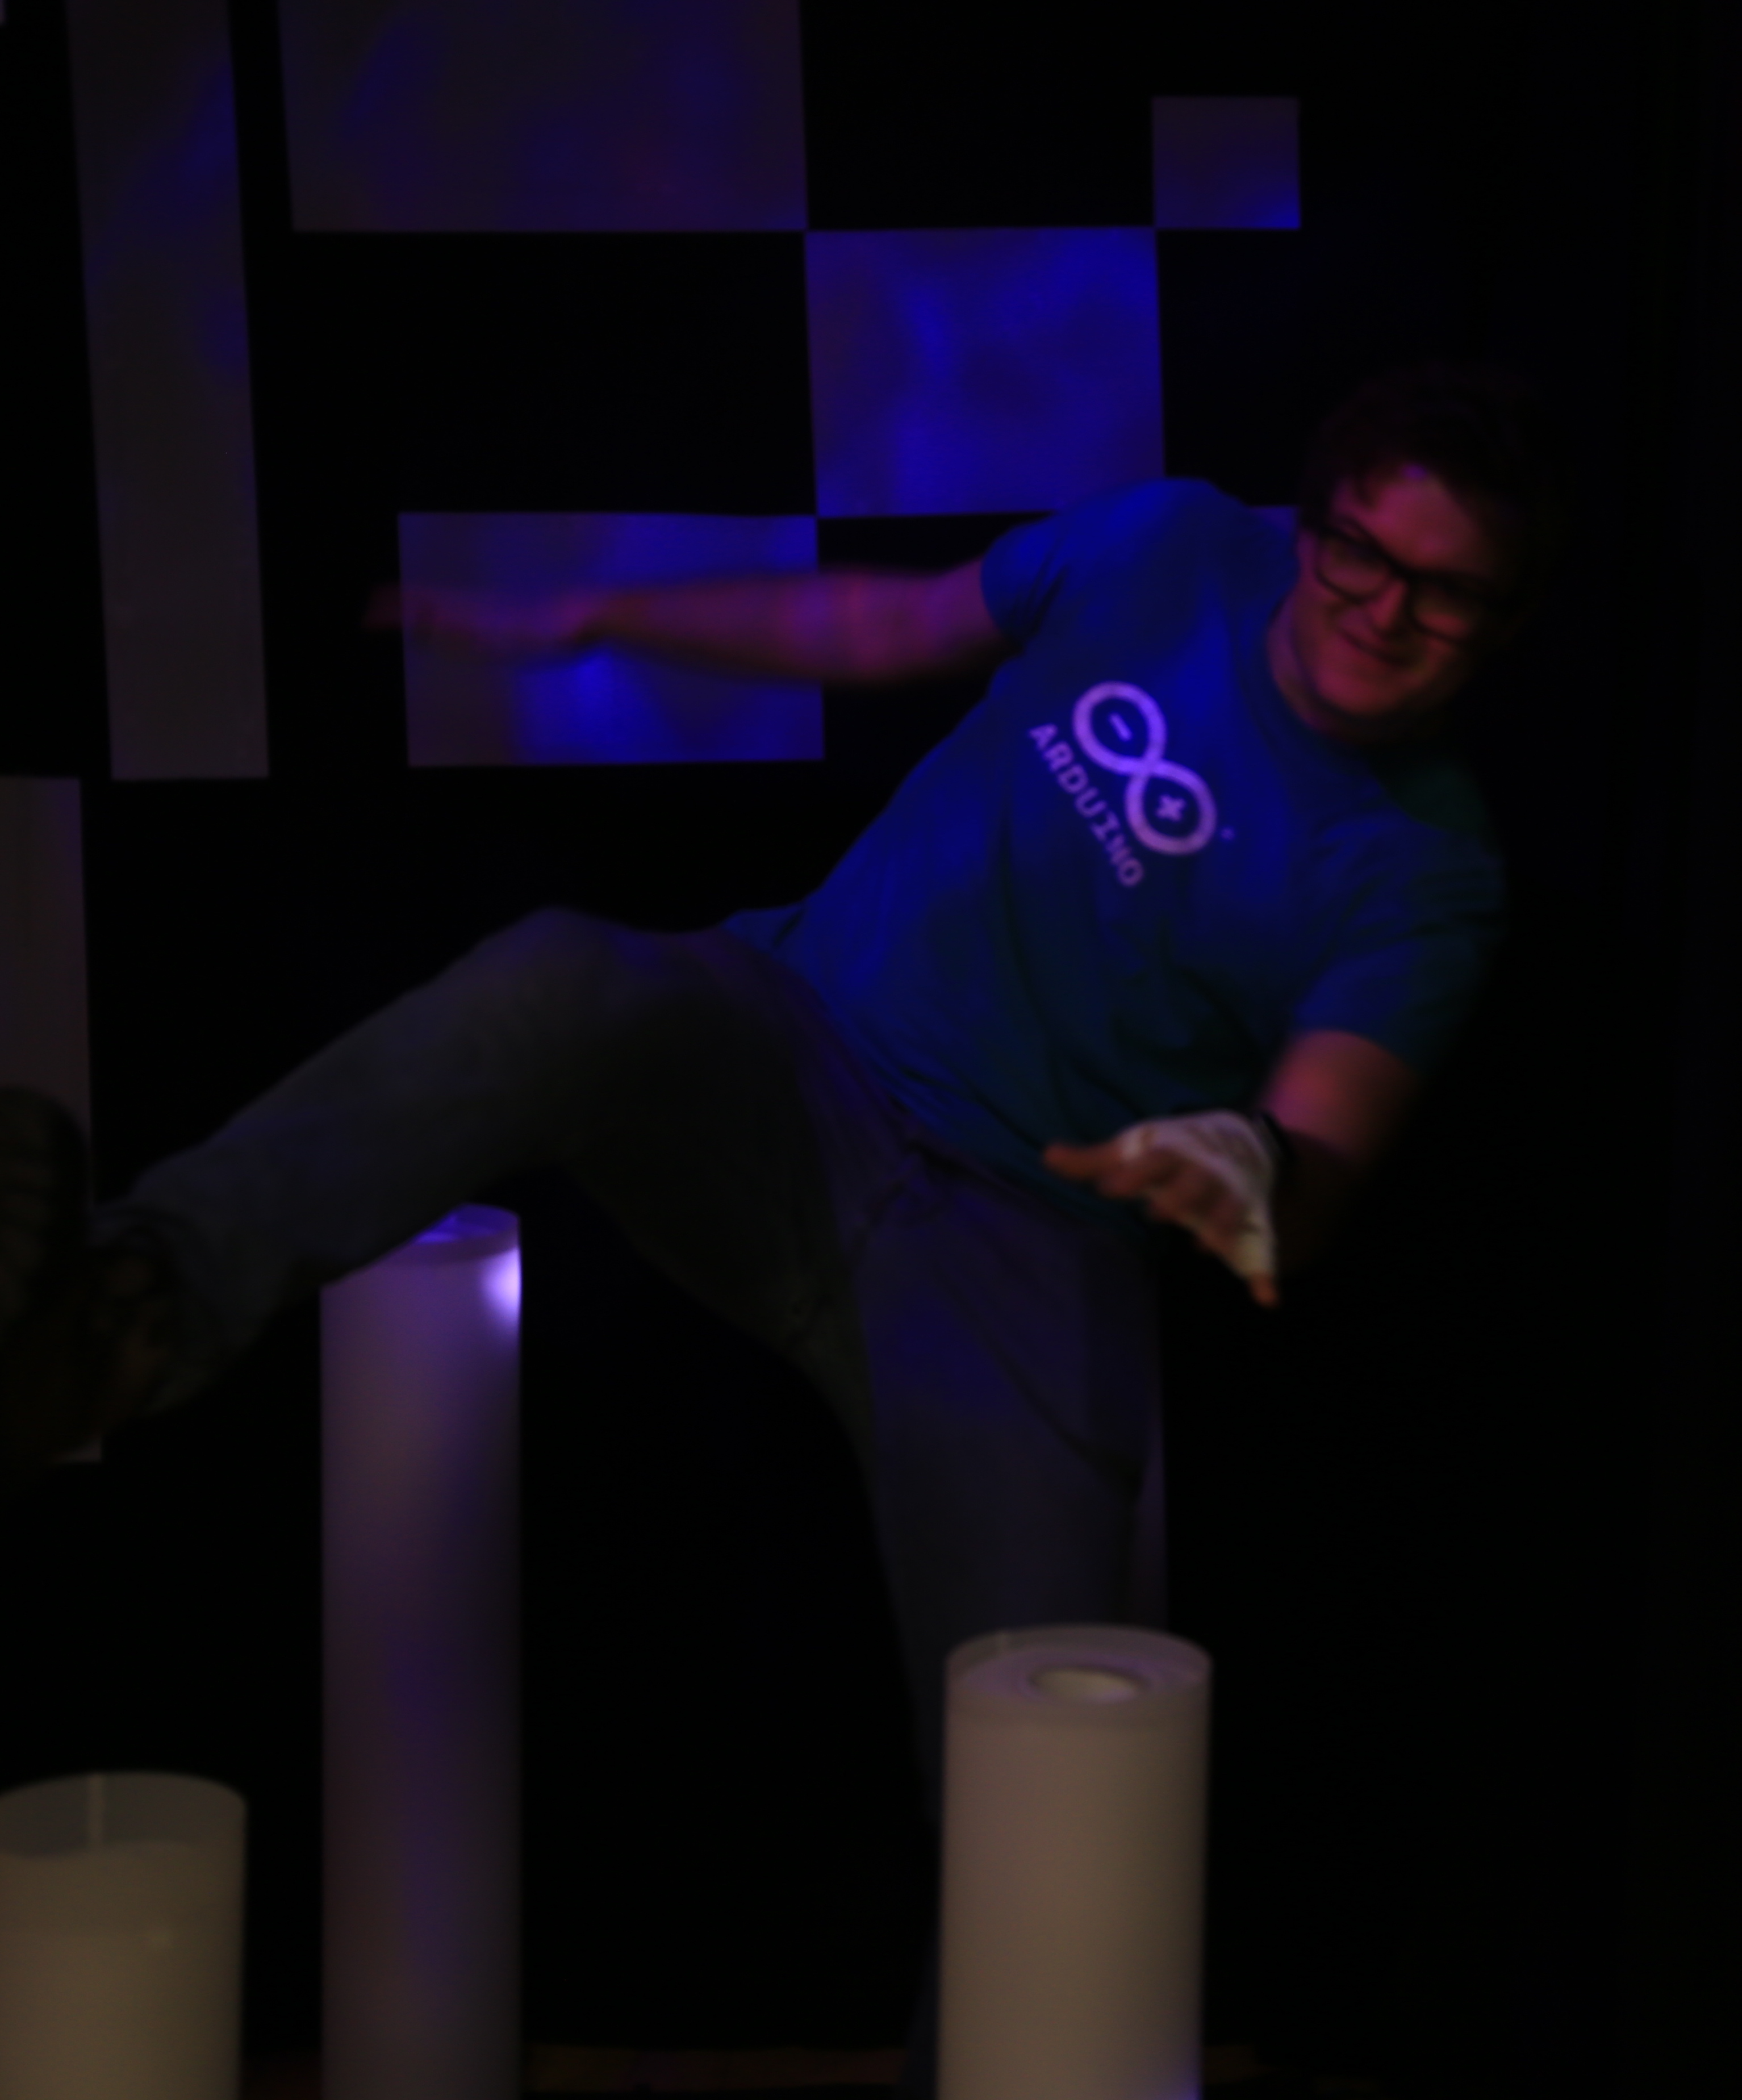 a man trying to balance on one leg over some glowing tubes